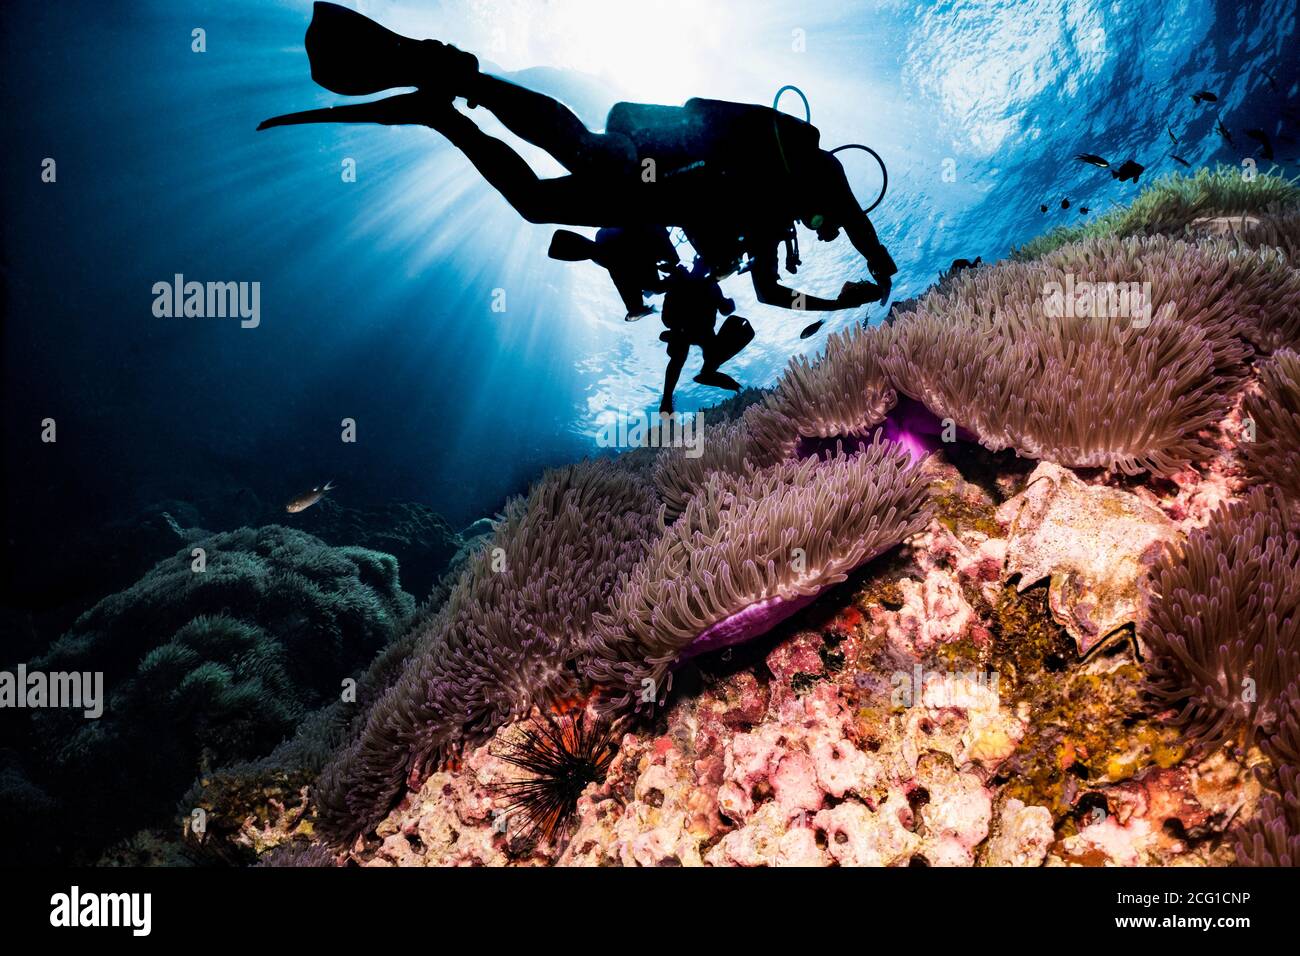 silhouette of scuba diver swimming over coral reef Stock Photo